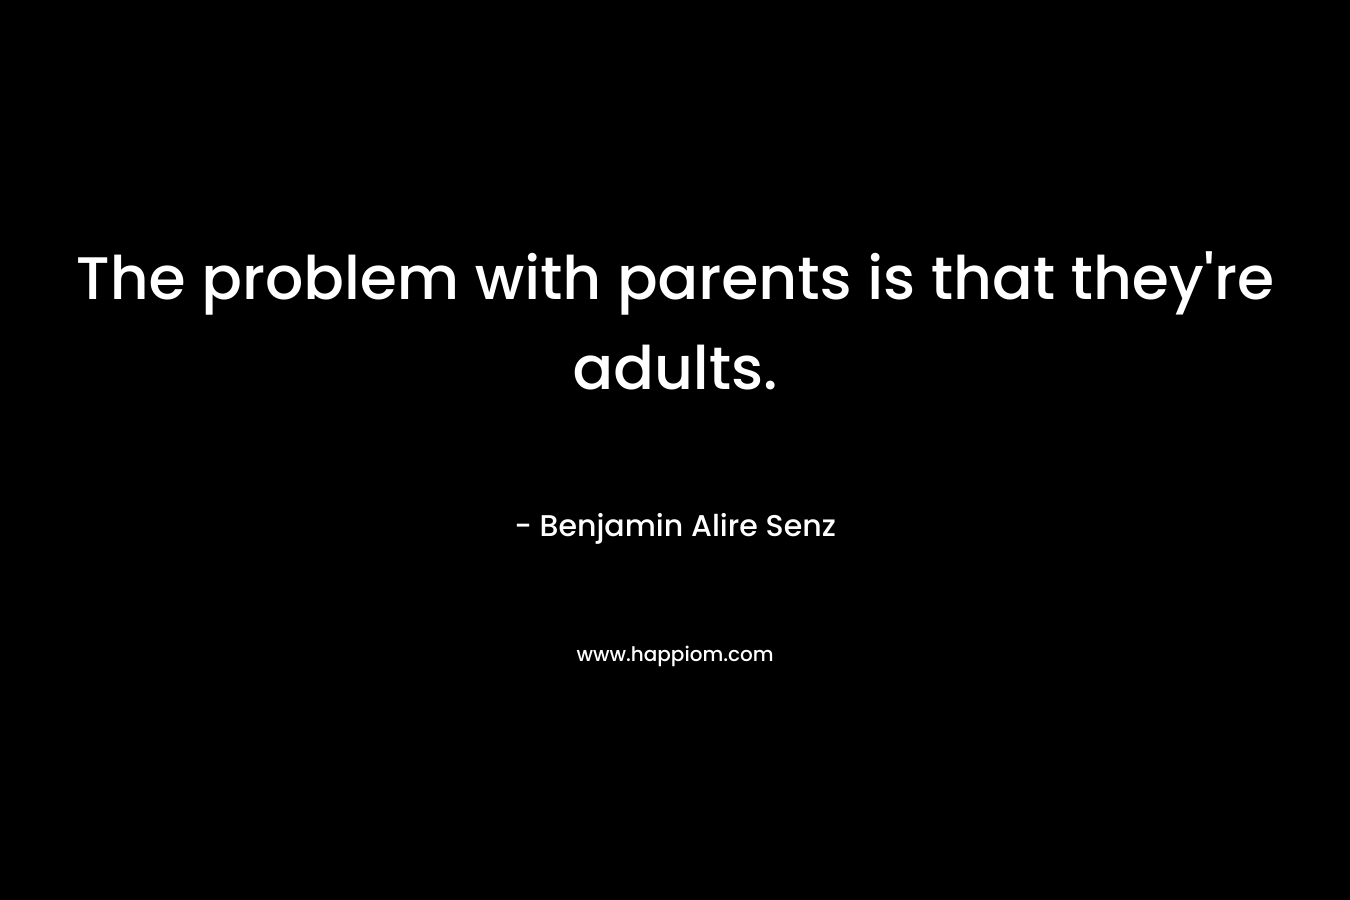 The problem with parents is that they’re adults. – Benjamin Alire Senz